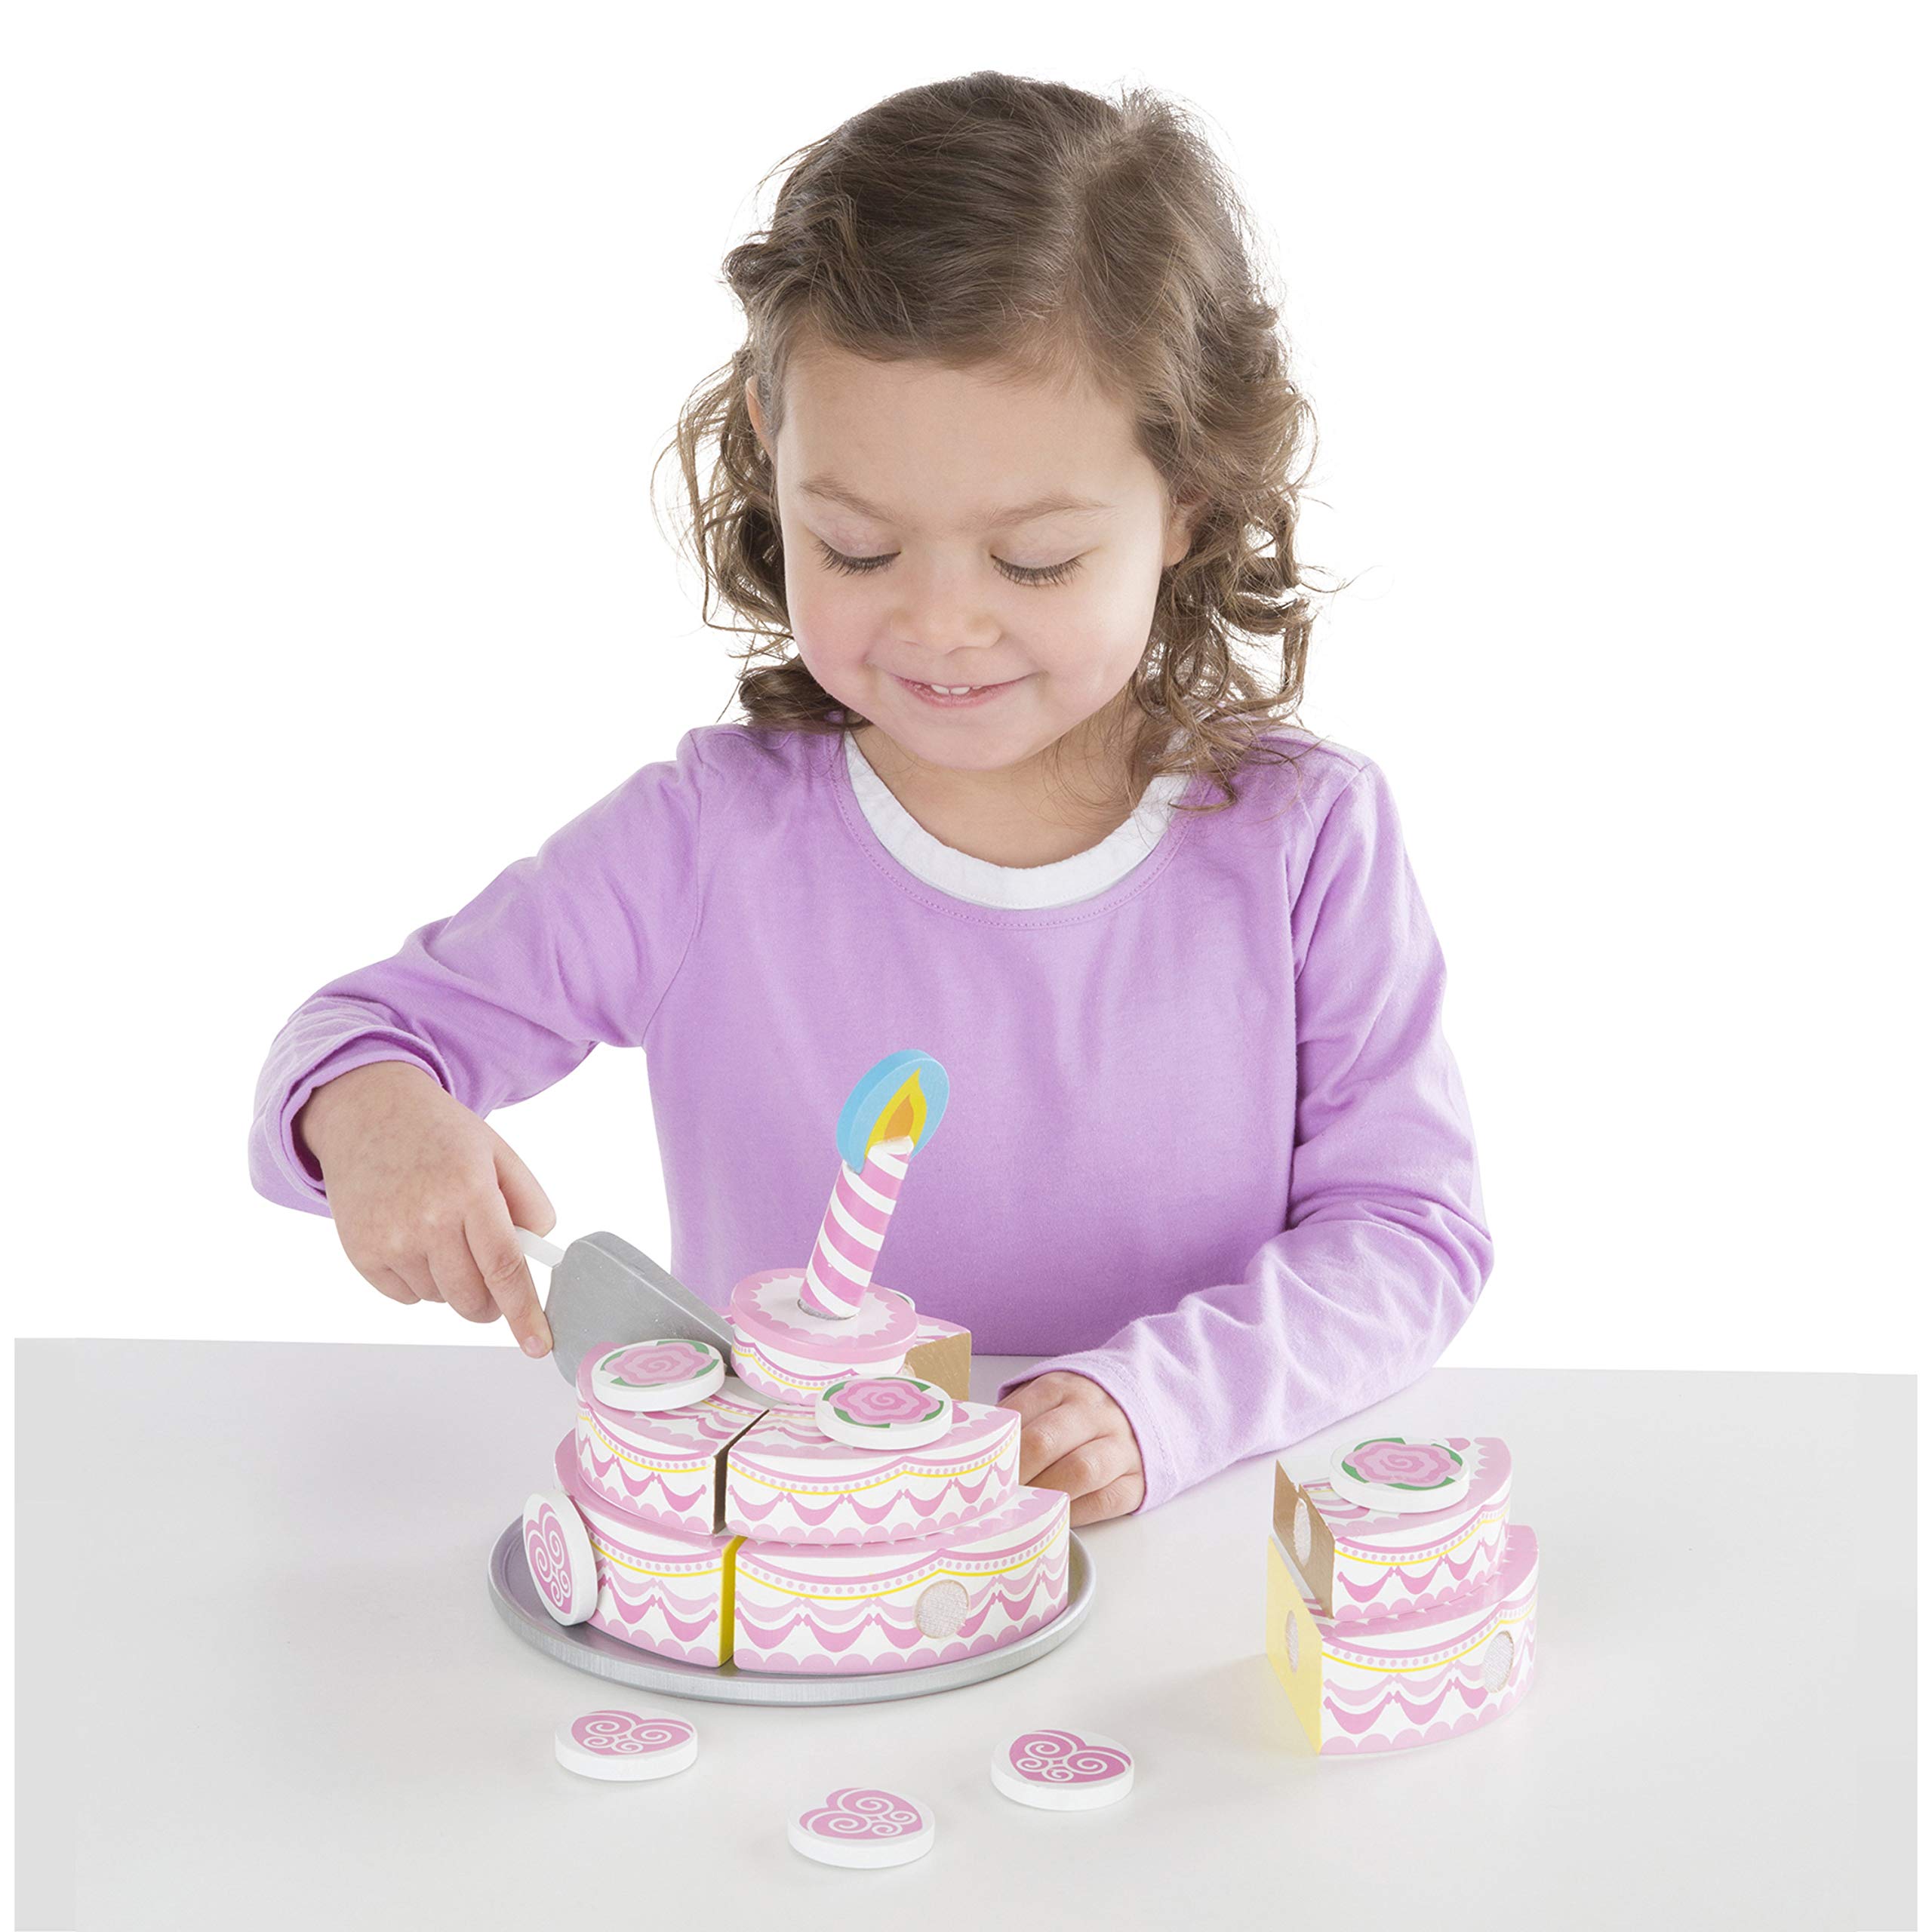 Melissa & Doug Triple-Layer Party Cake Wooden Play Food Set - Birthday Cake Pretend Food Play Set For Toddlers, Kids Ages 3+